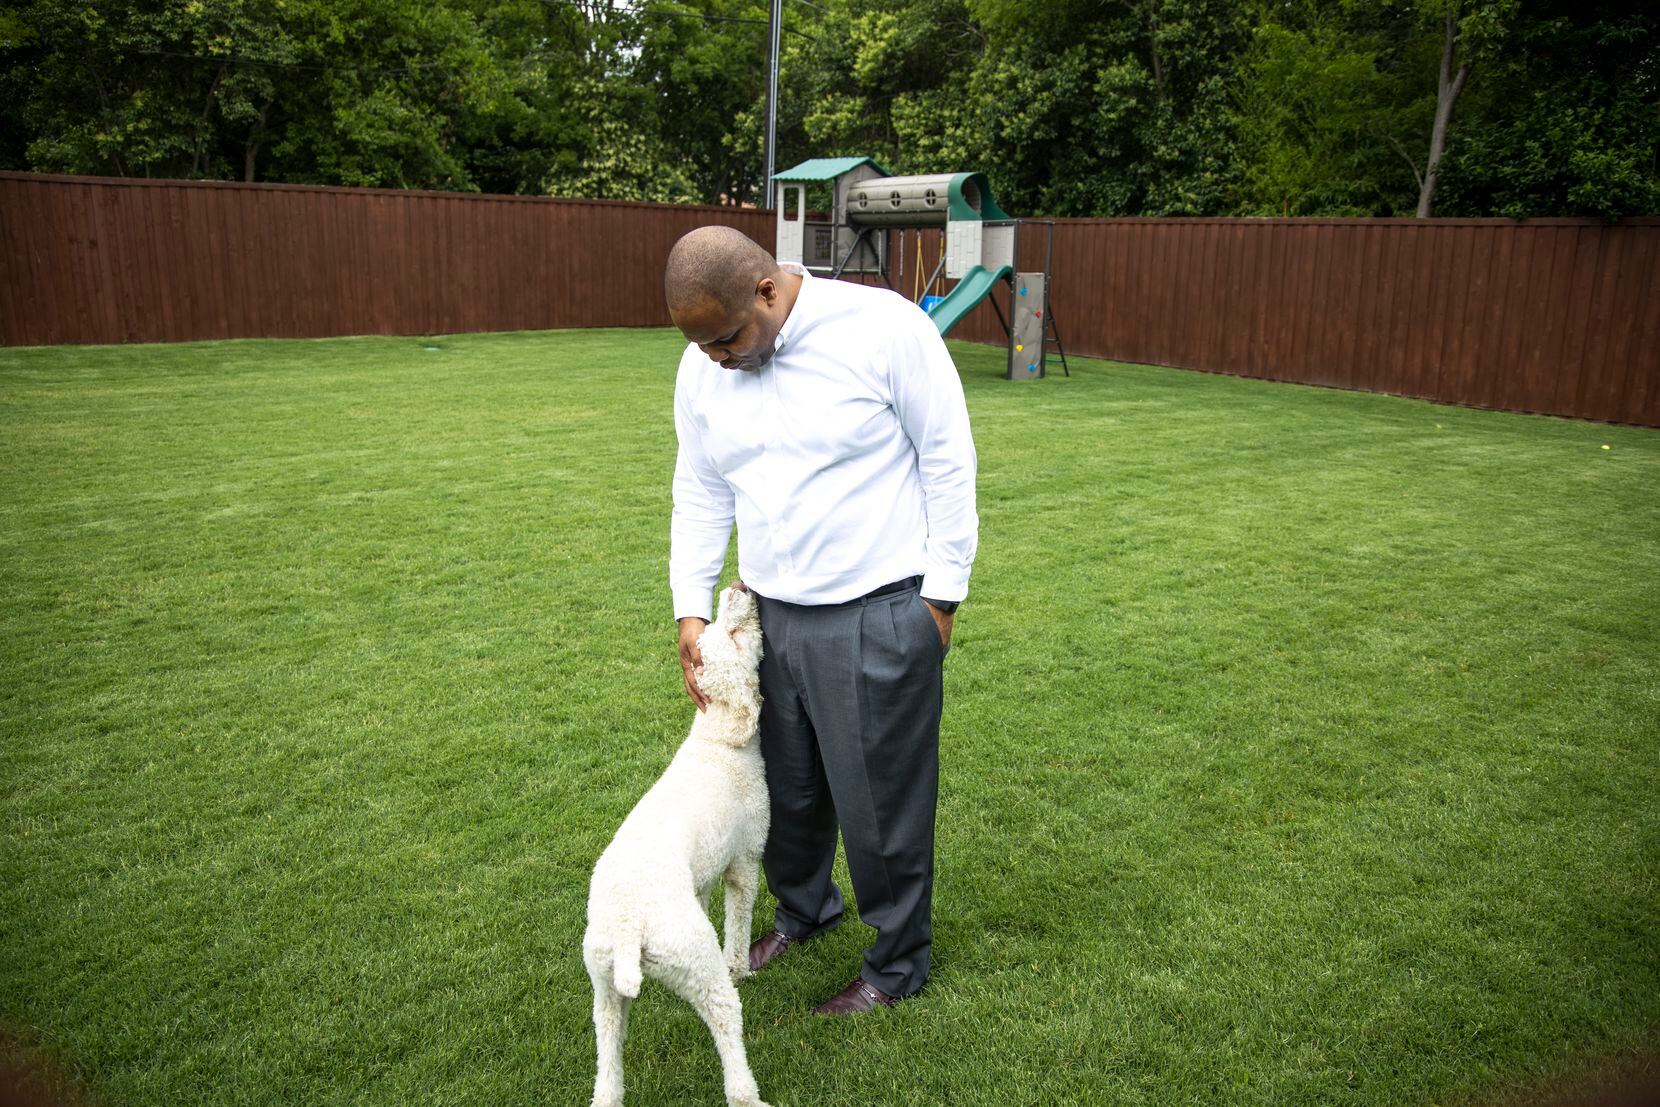  Eric Johnson with his new dog, Penny, in the backyard of his East Dallas home. (Shaban Athuman/Staff Photographer)